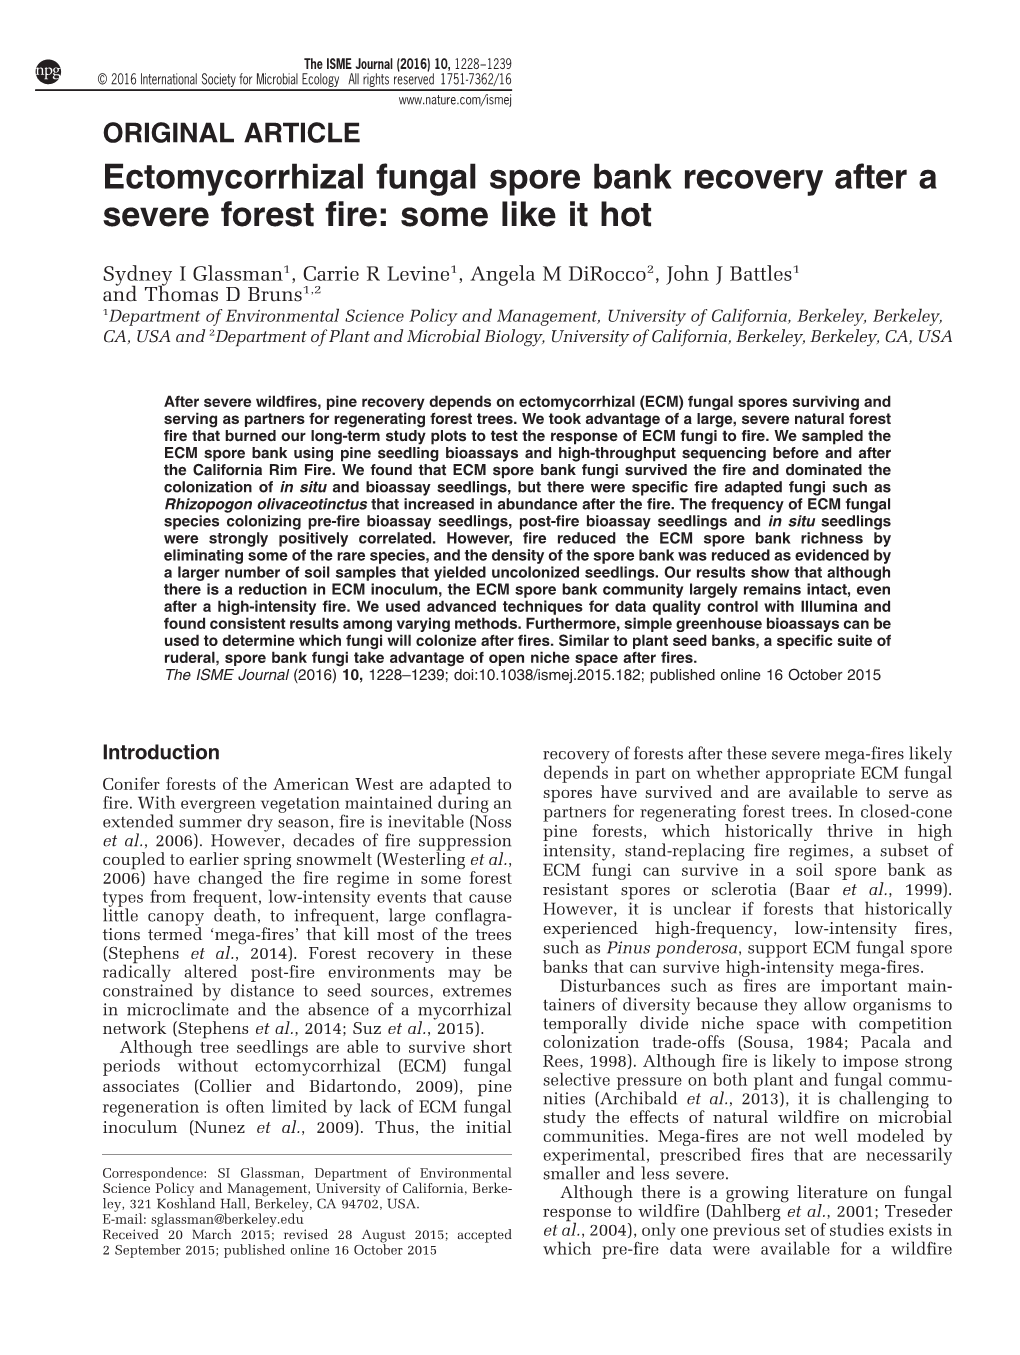 Ectomycorrhizal Fungal Spore Bank Recovery After a Severe Forest Fire: Some Like It Hot